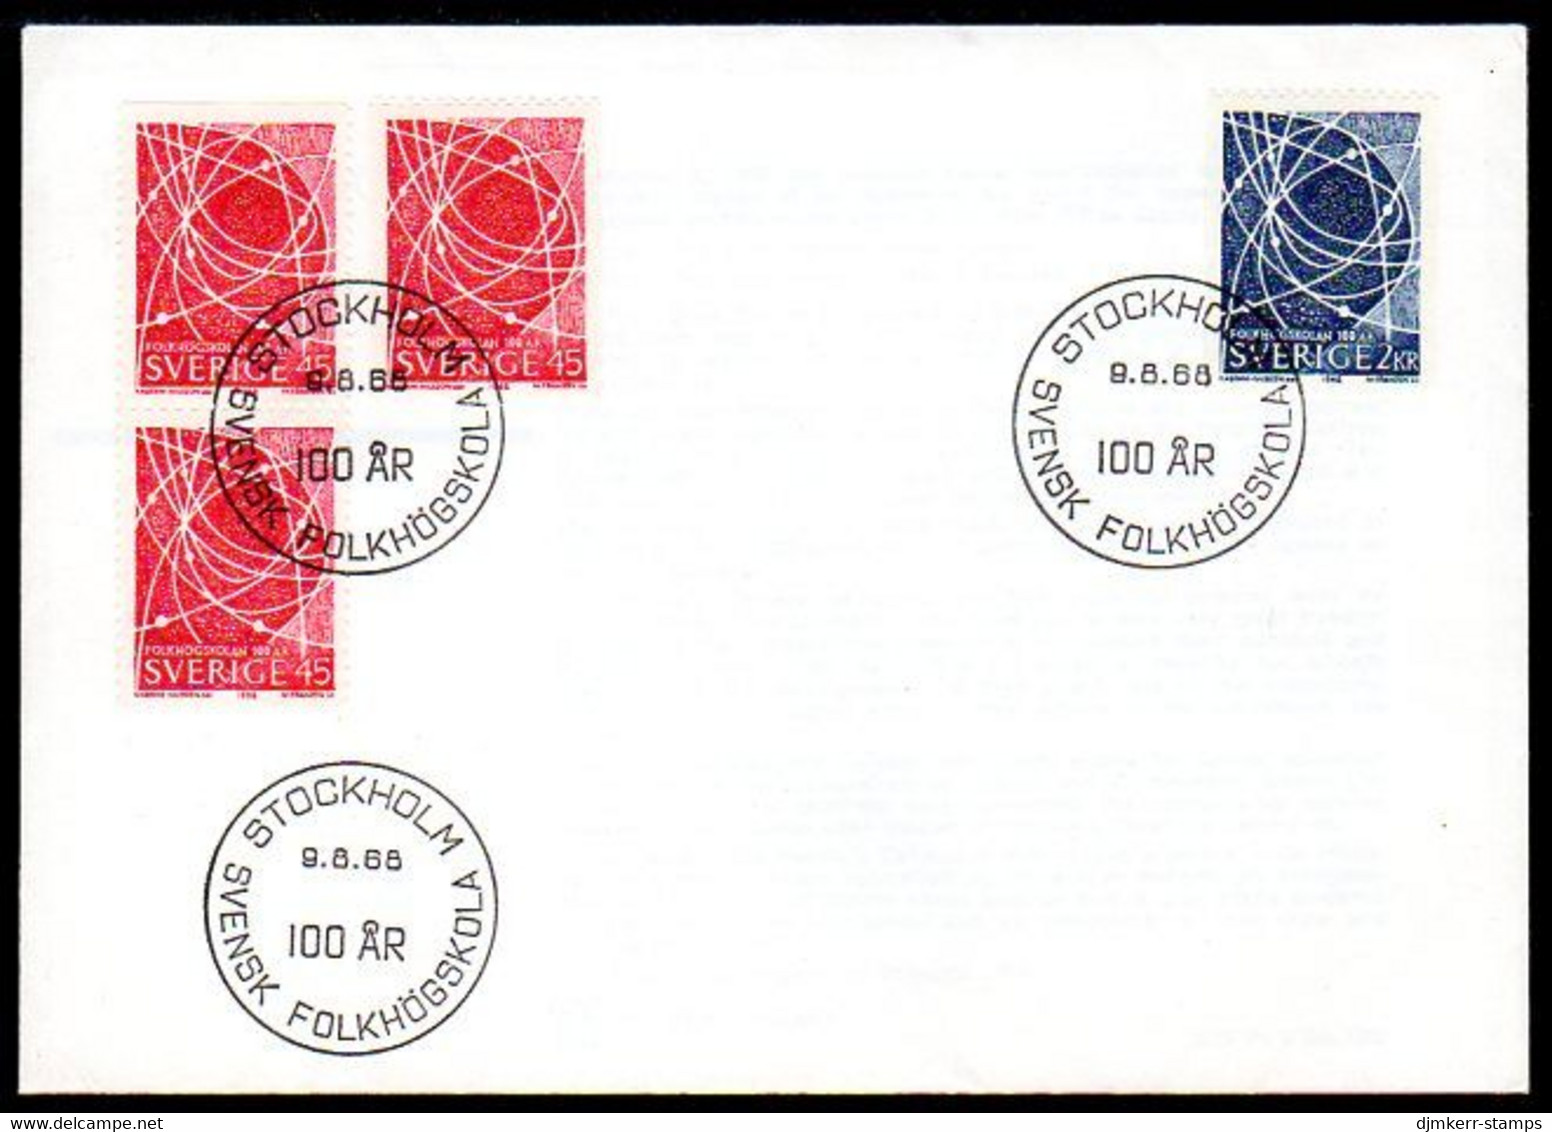 SWEDEN 1968 Centenary Of People's High Schools FDC.  Michel 614-15 - FDC